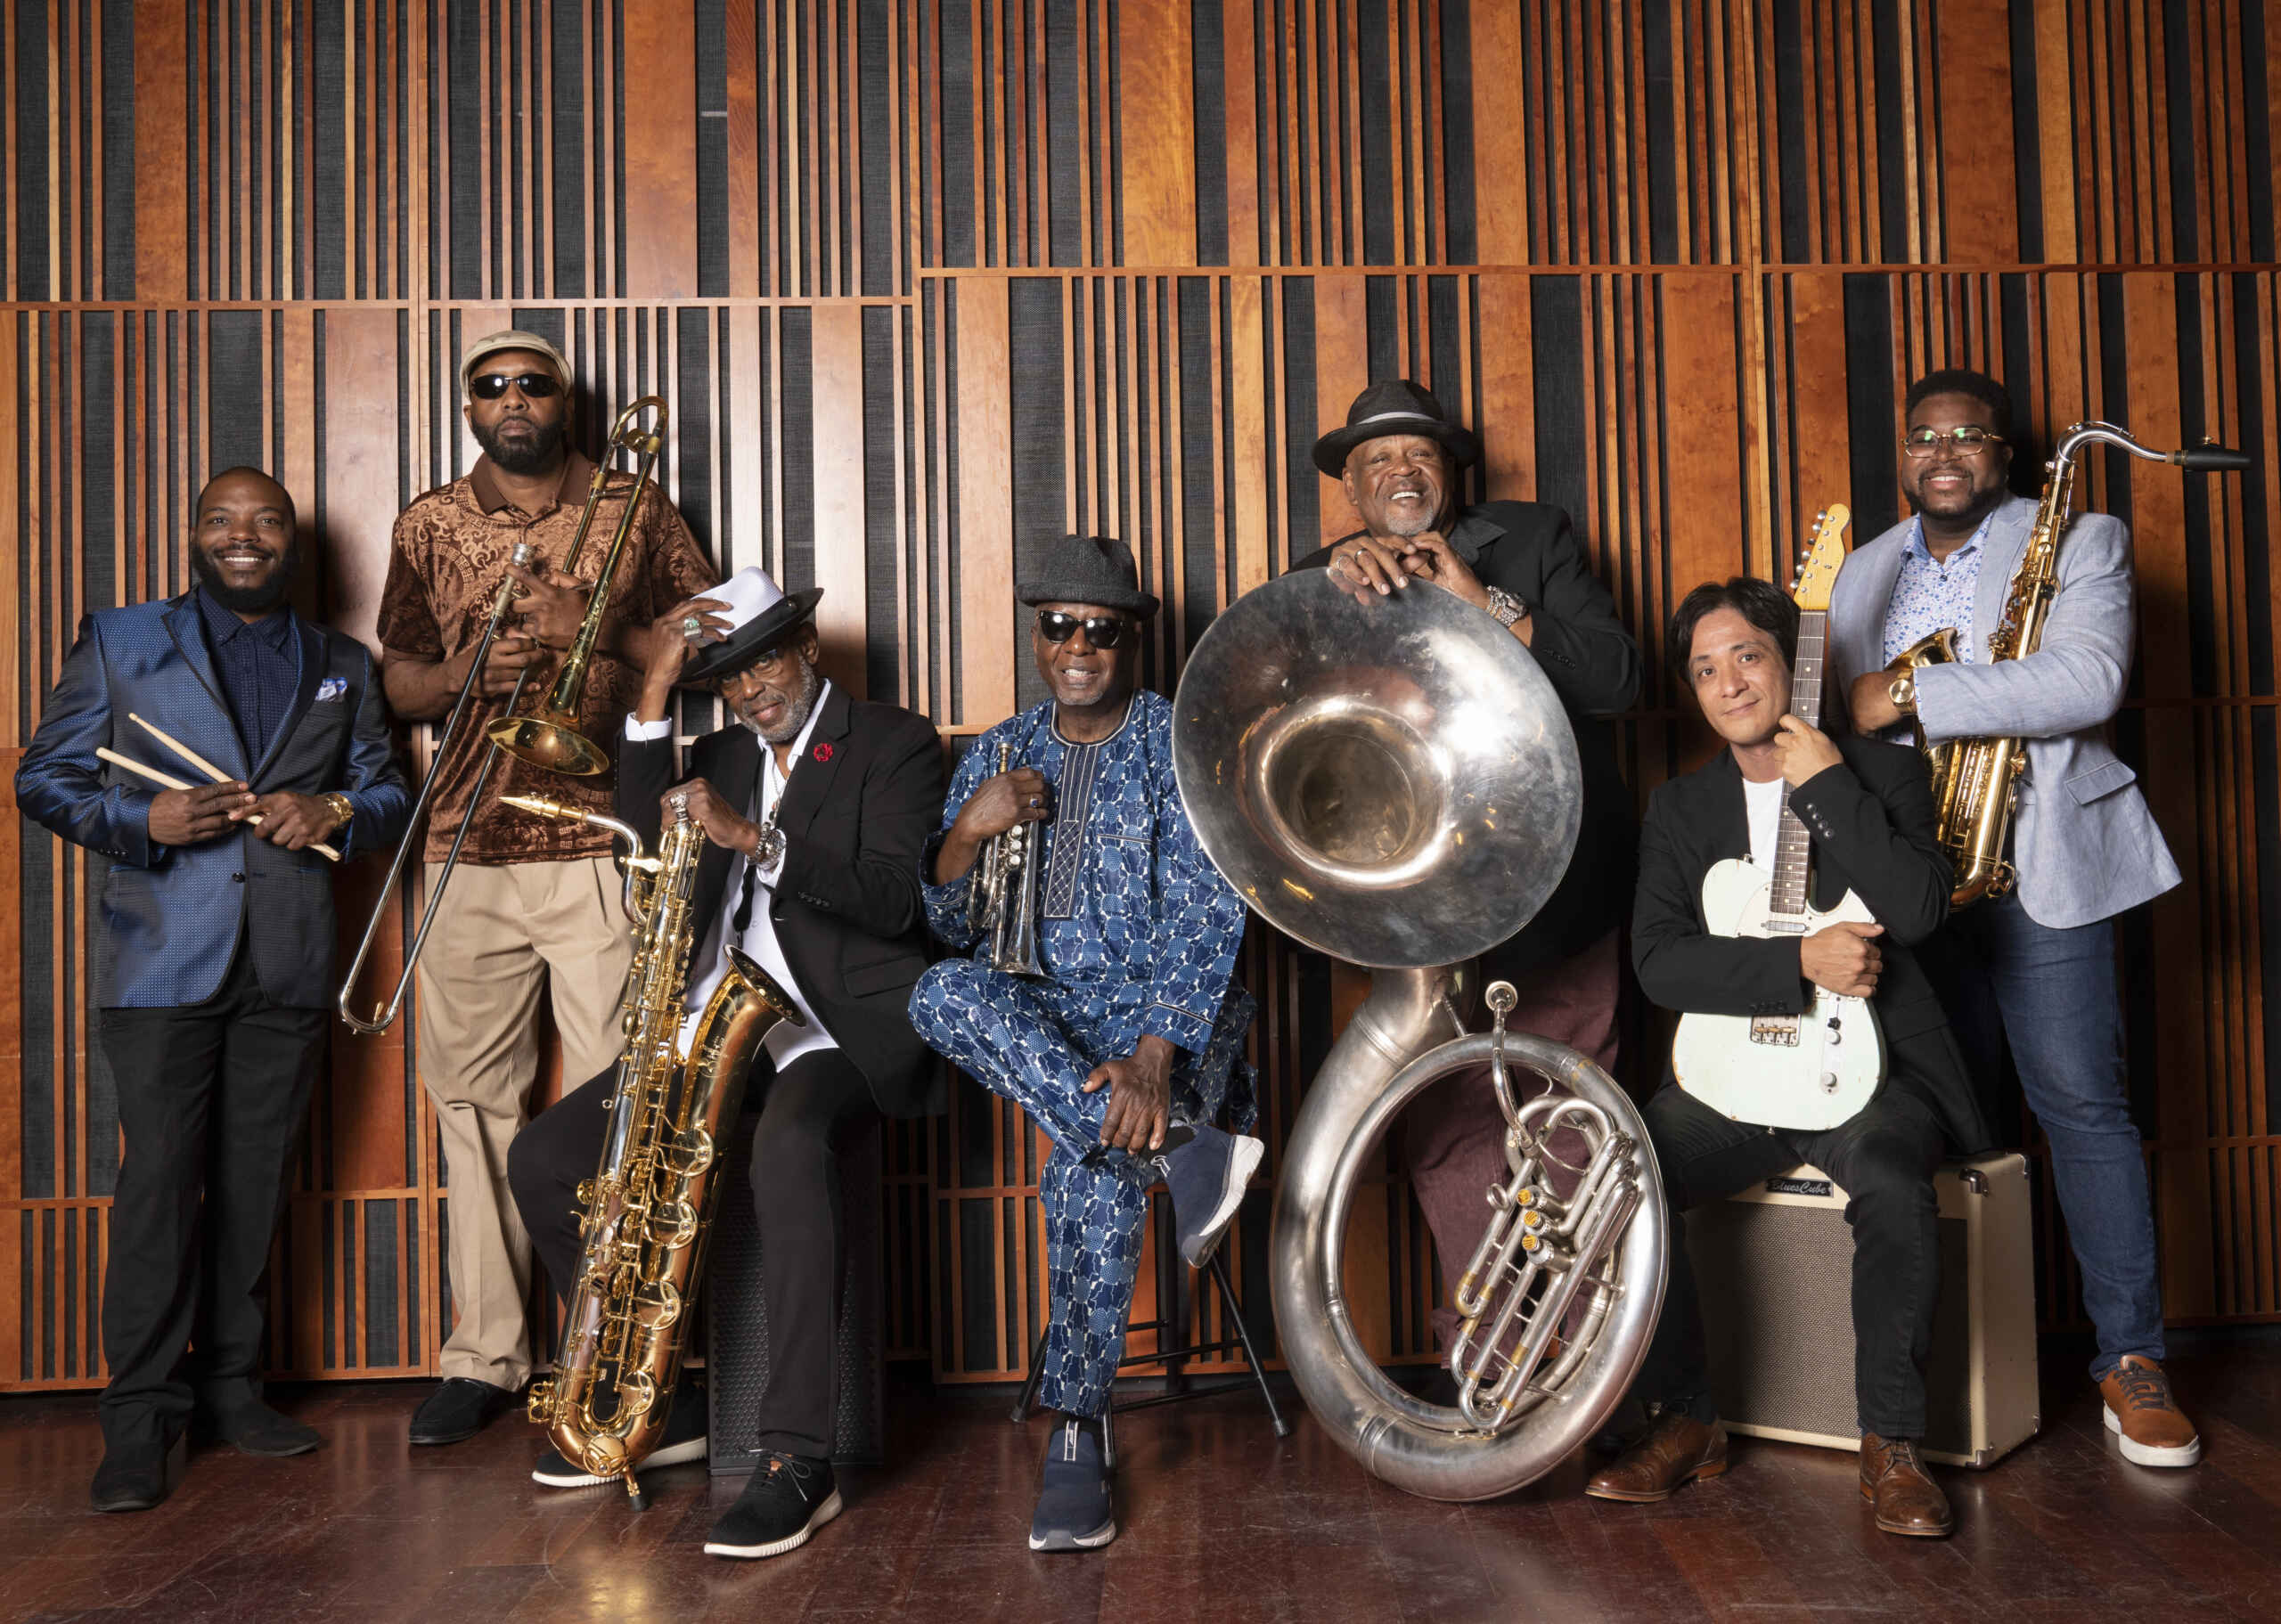 Mardi Gras Mambo featuring The Dirty Dozen Brass Band and Nathan